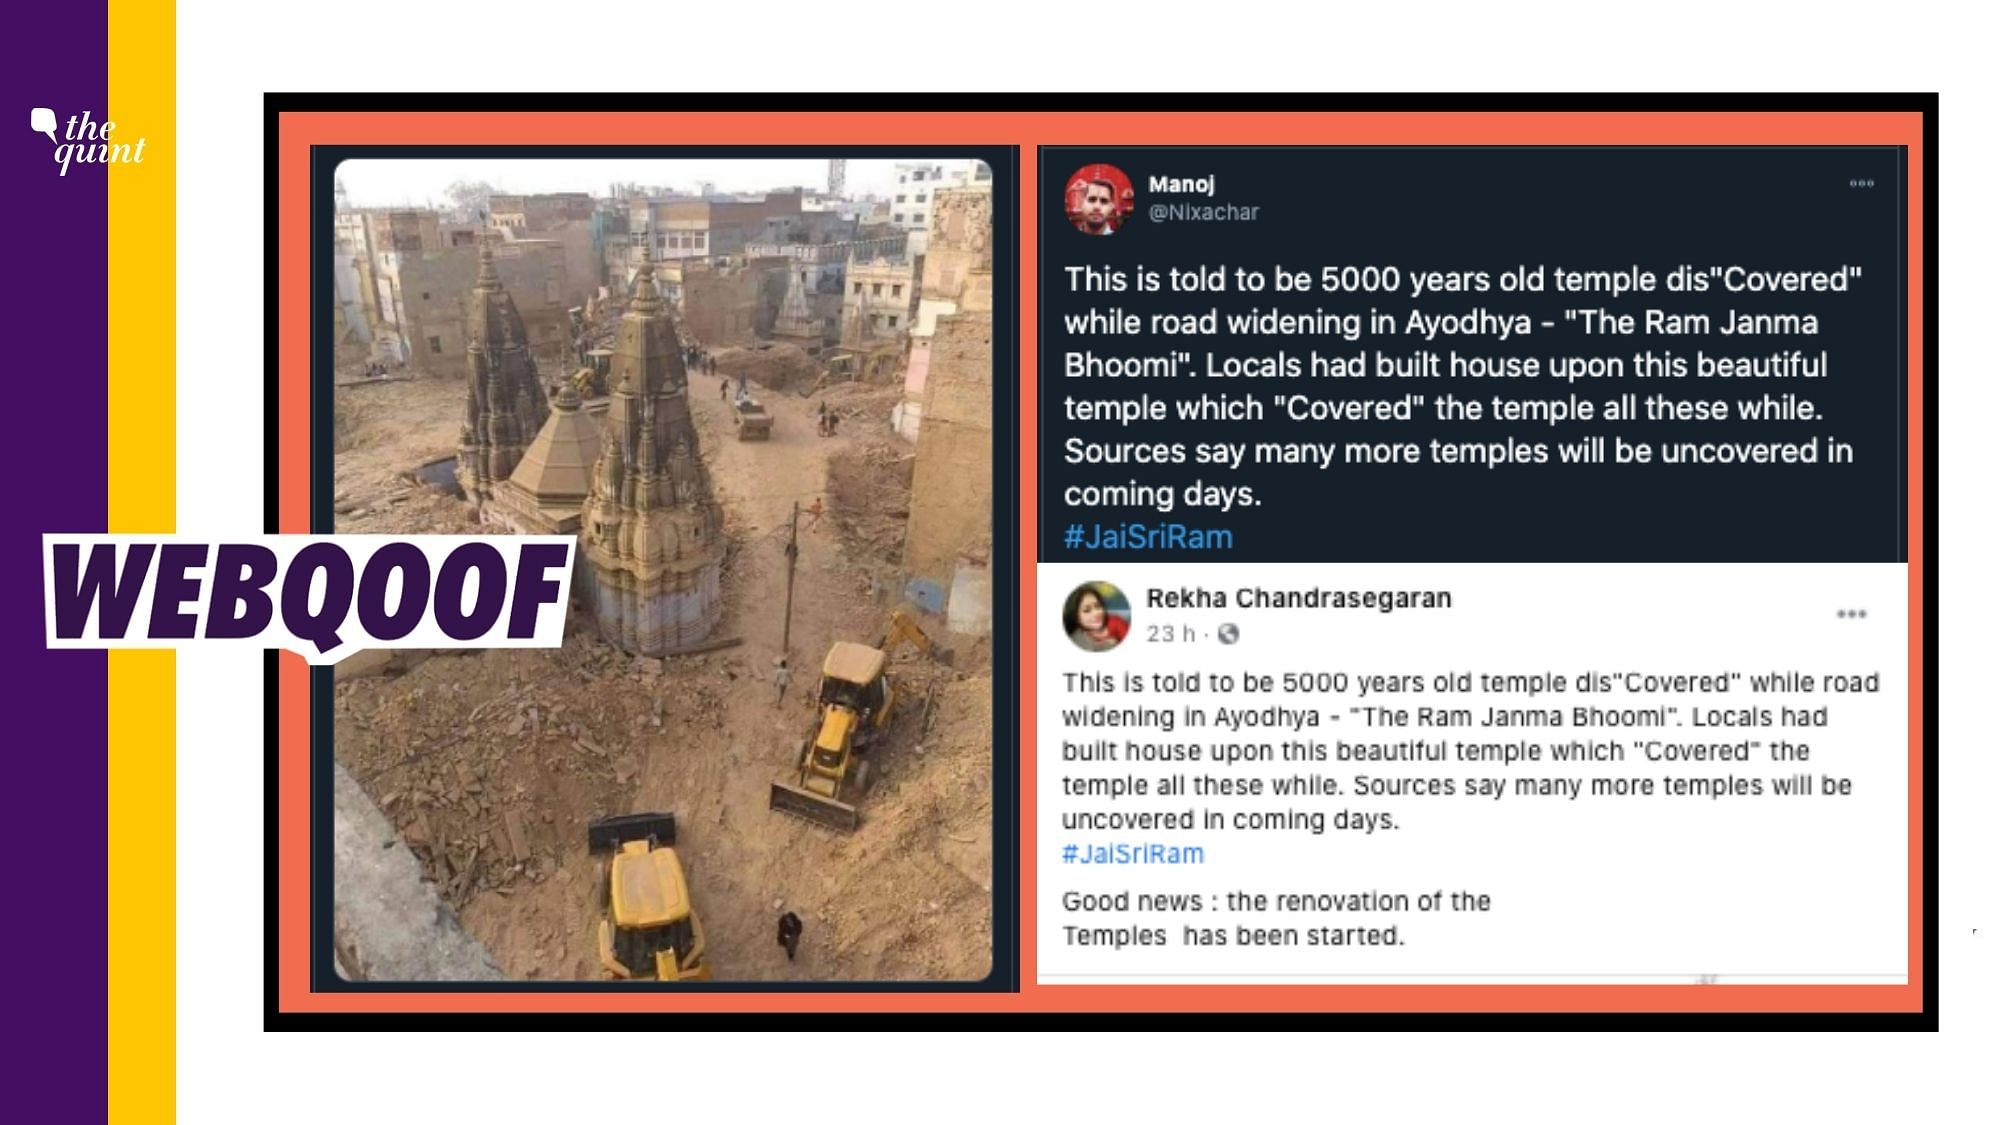 Image of an under-construction structure resembling a temple is being shared on internet with a claim that it is from Ayodhya in Uttar Pradesh.